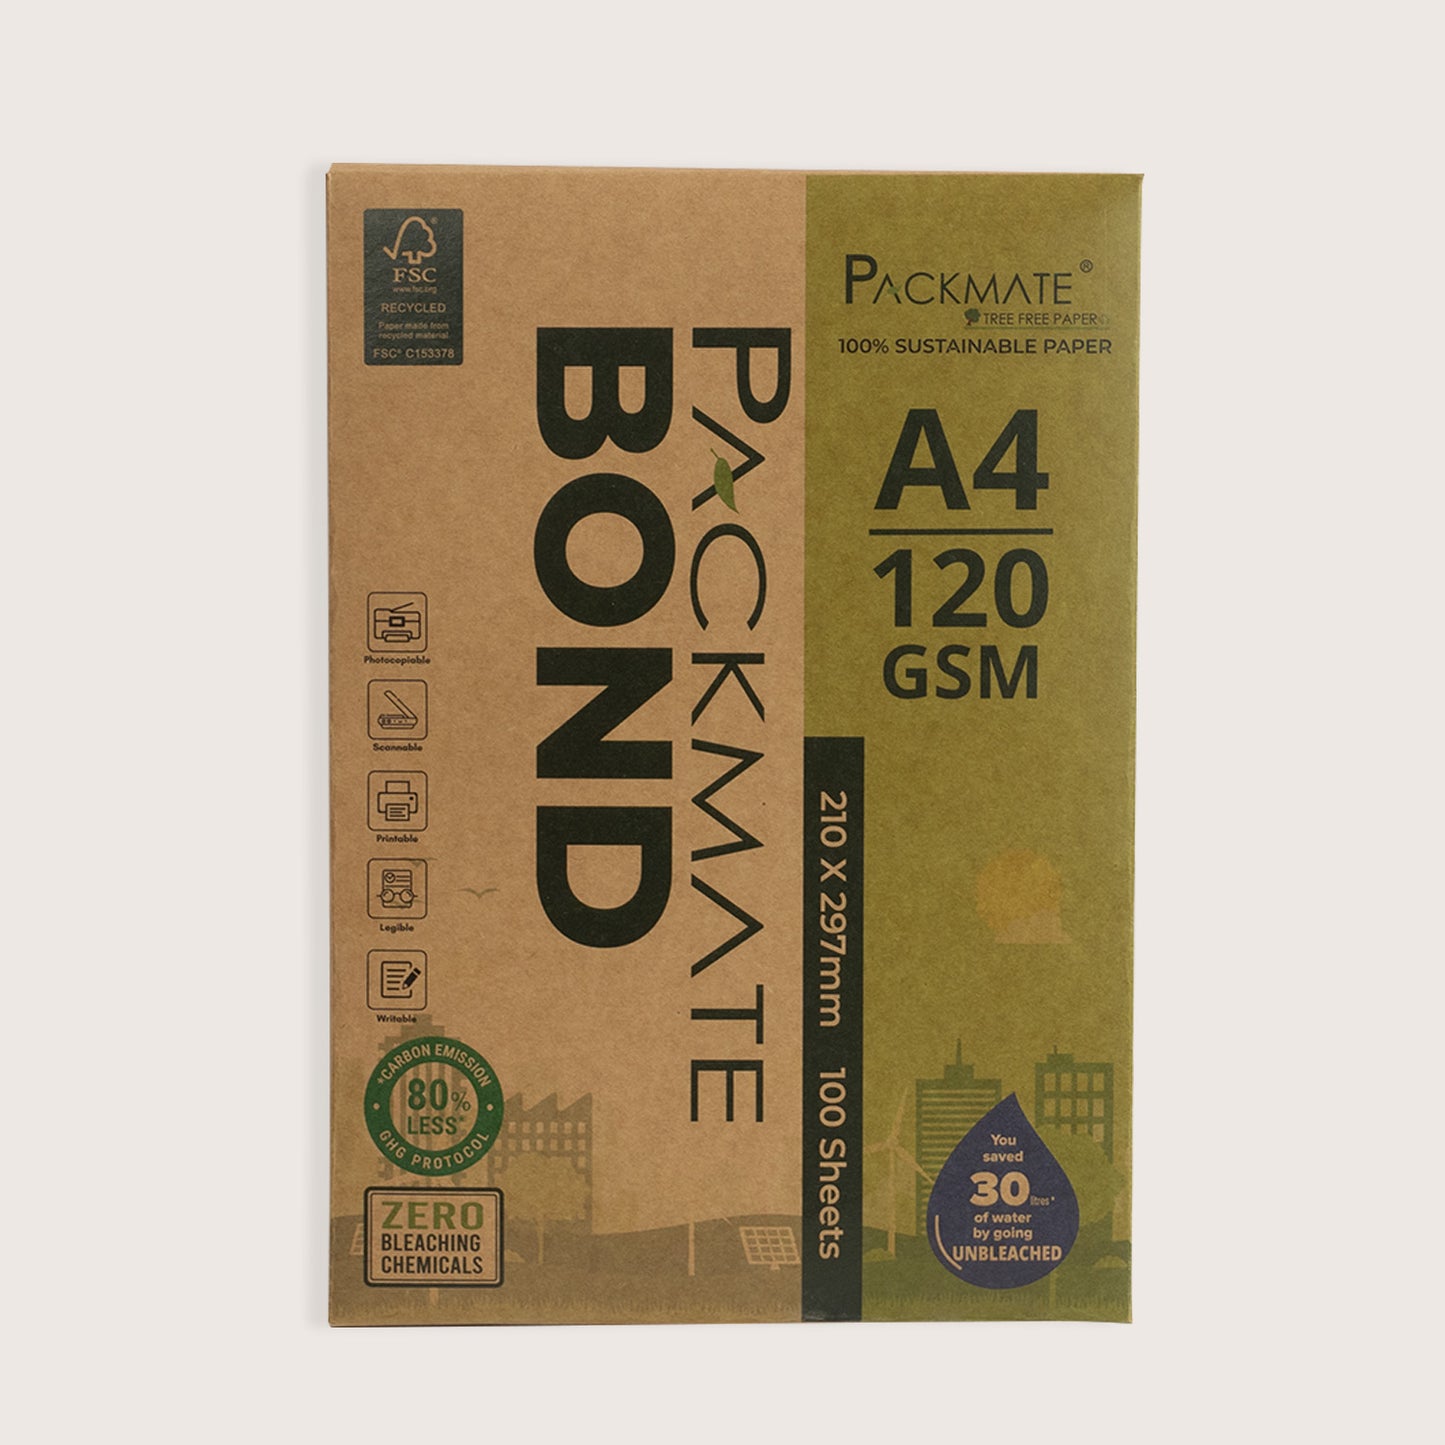 Packmate Bond Paper (120 GSM | A4 Size - 100 Sheets)| Made From 100% Recycled Paper